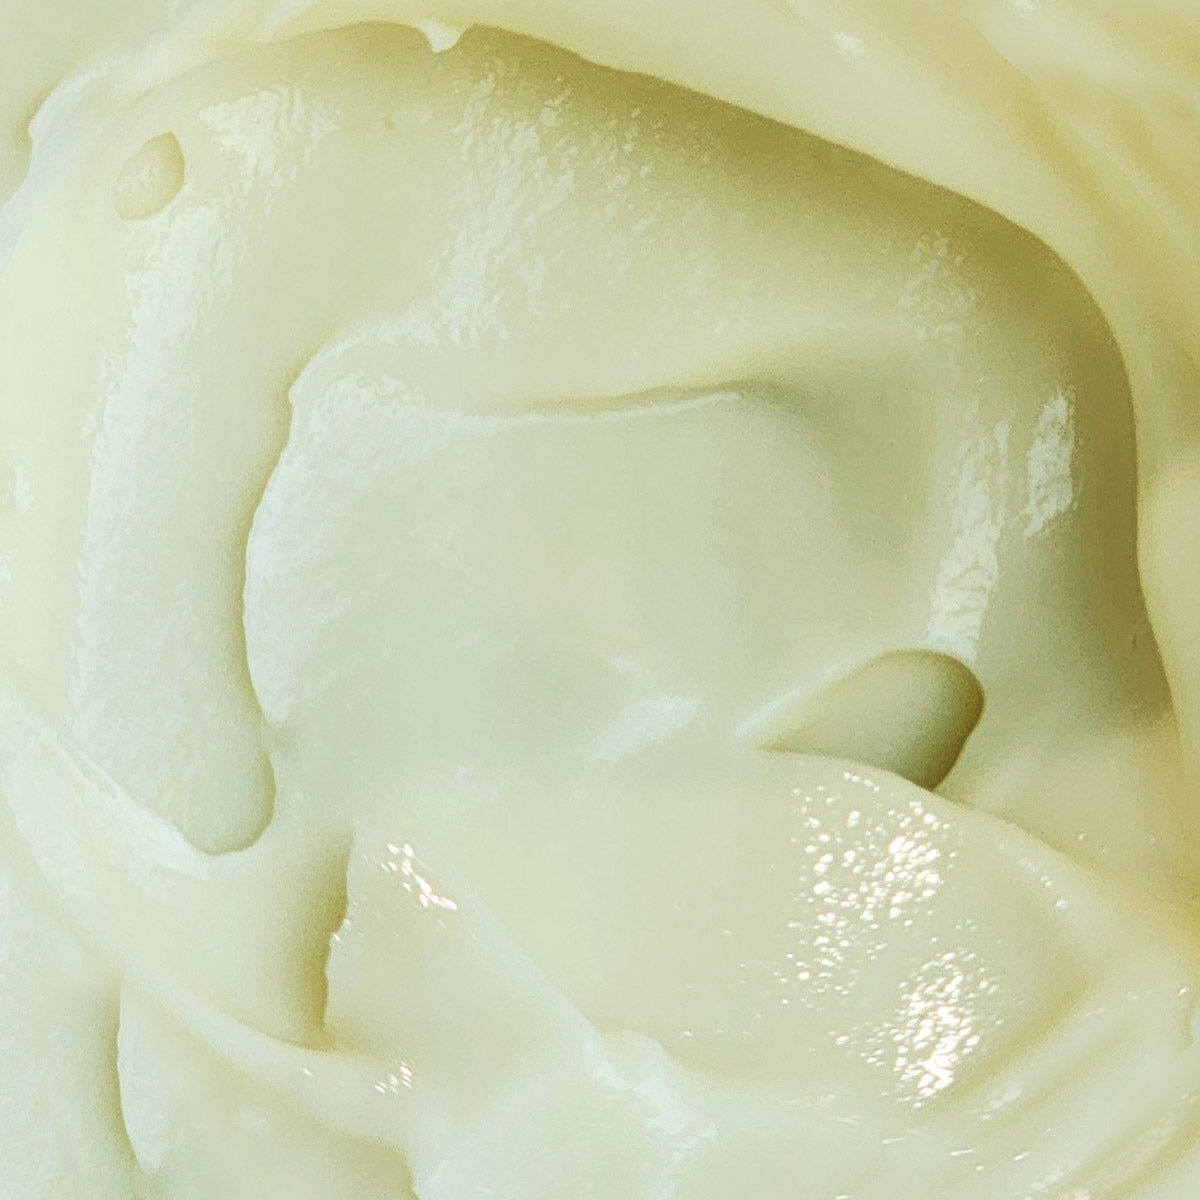 texture of Avocado Fruit Moisture Cream, a hydrating product from Carol Priest's line of natural, organic cosmetics.